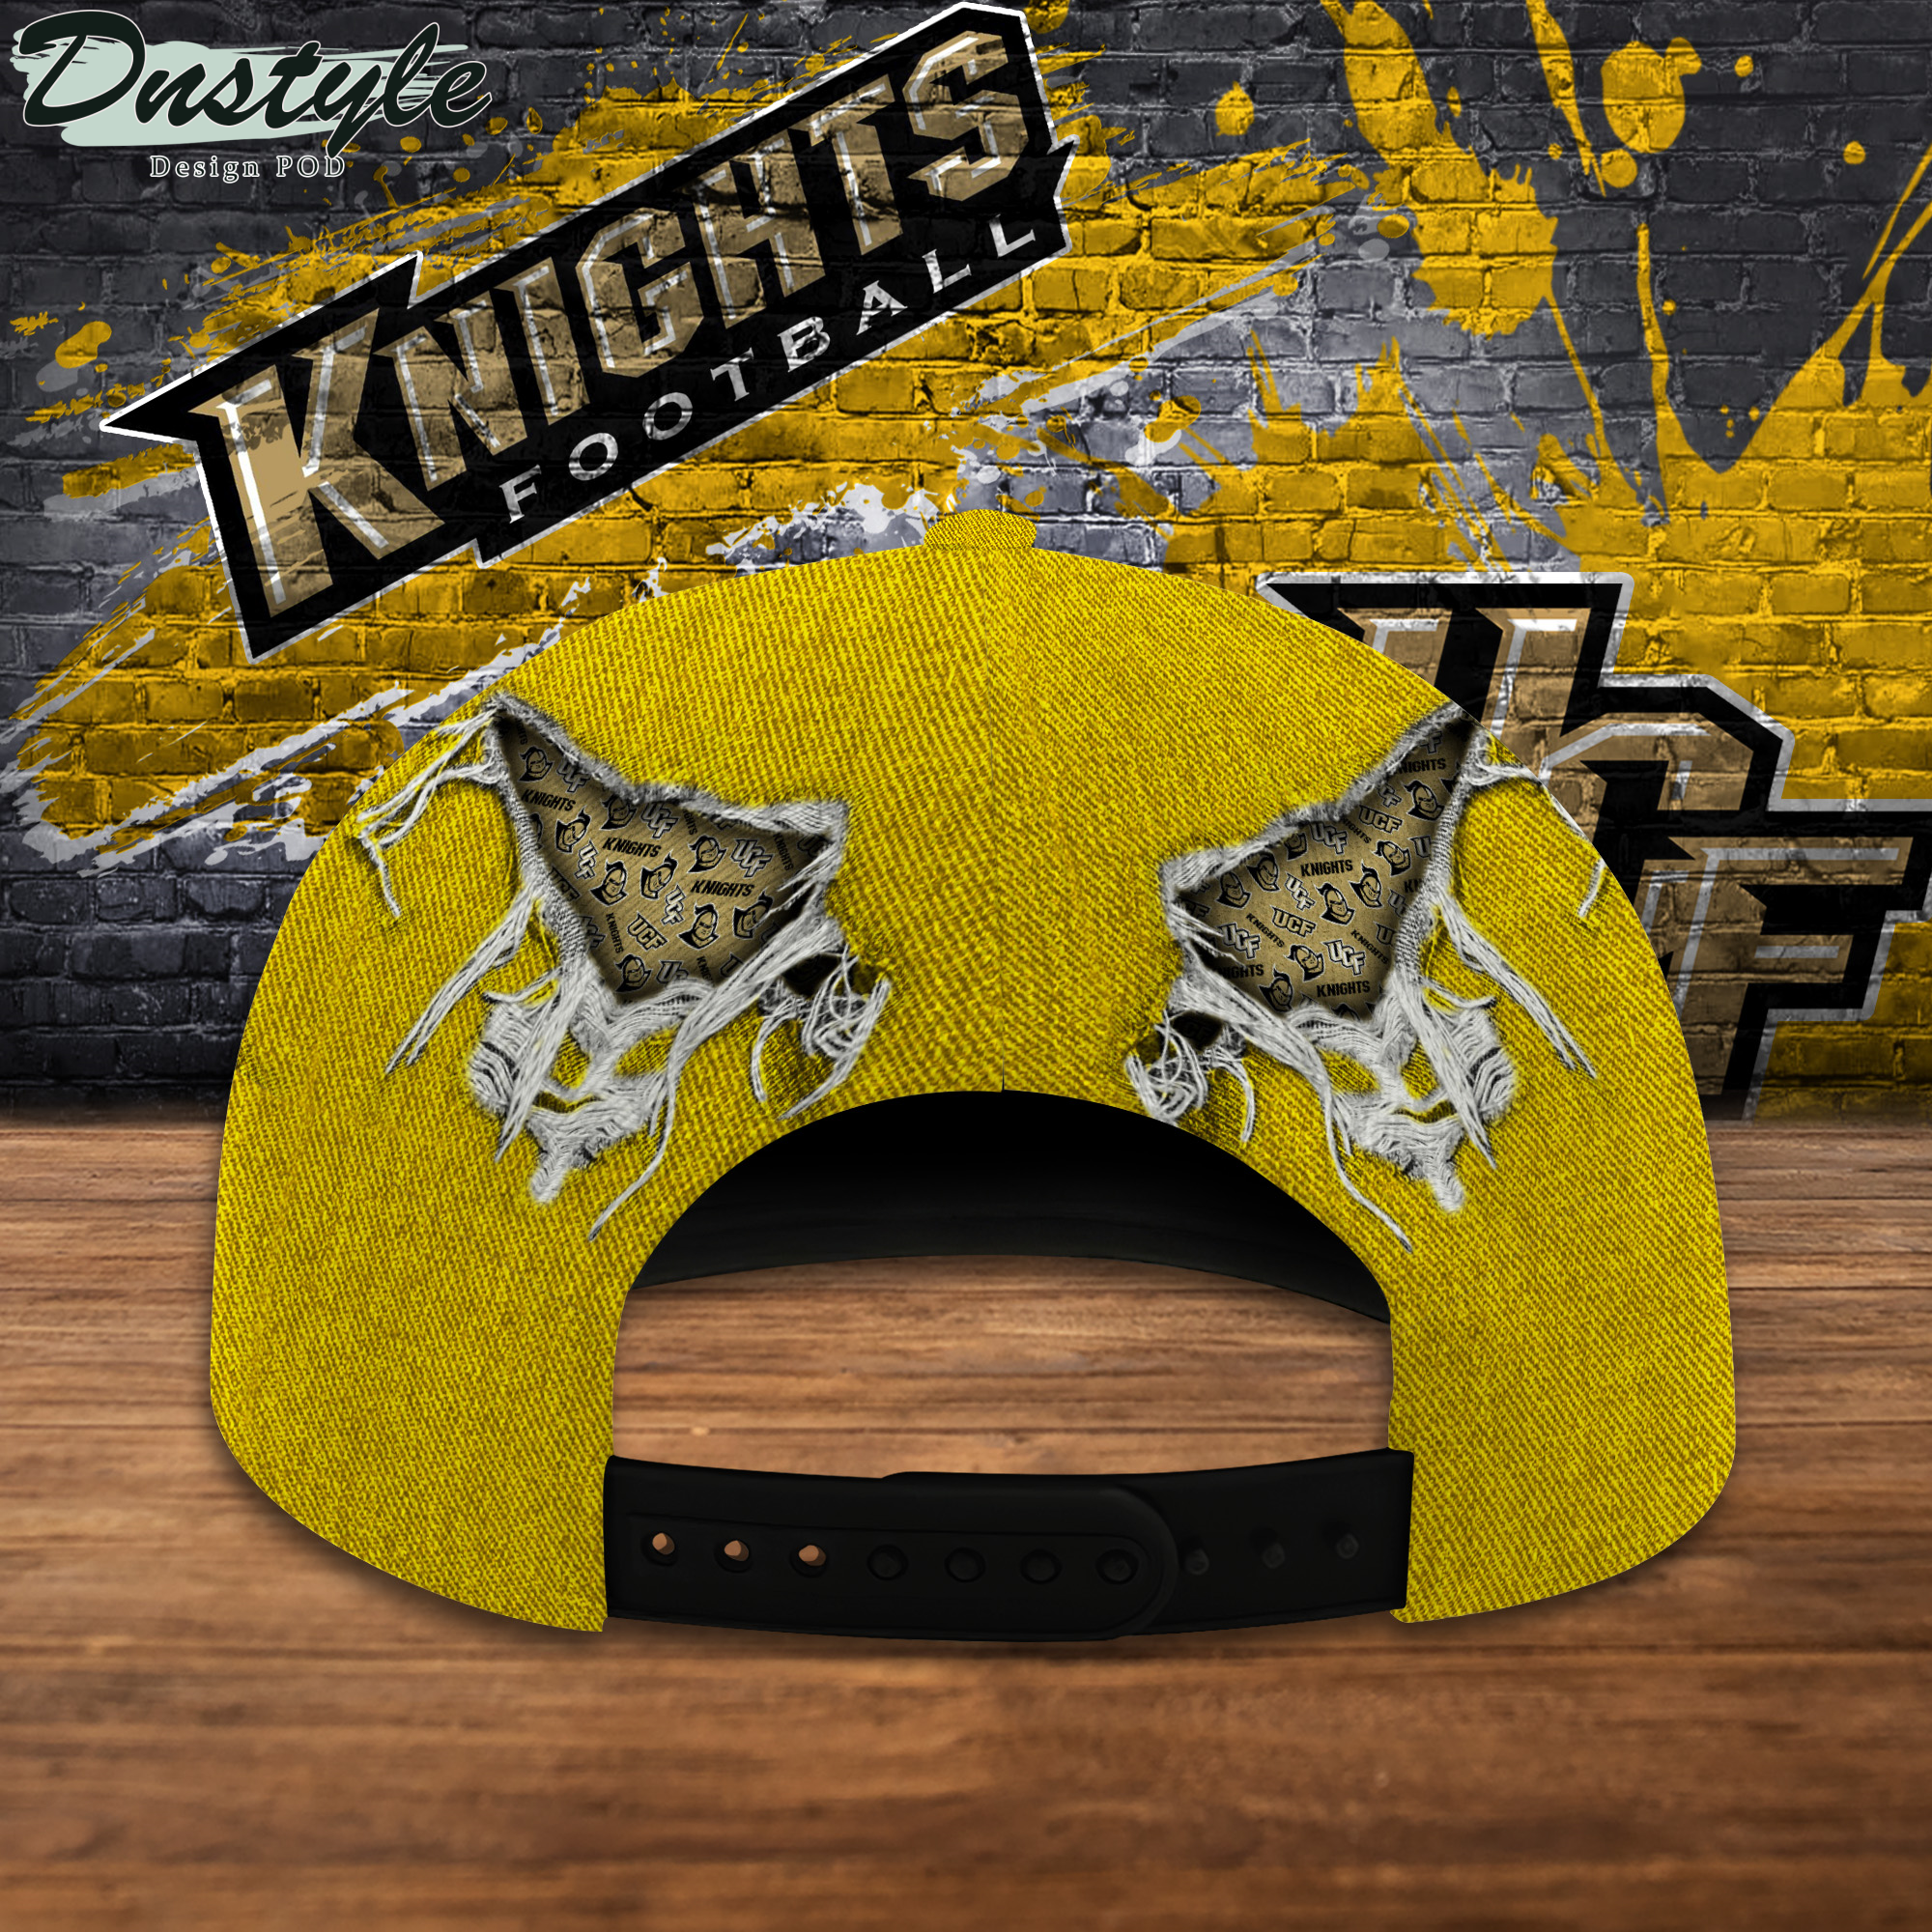 UCF Knights NCAA Trending 2022 Personalize Cap